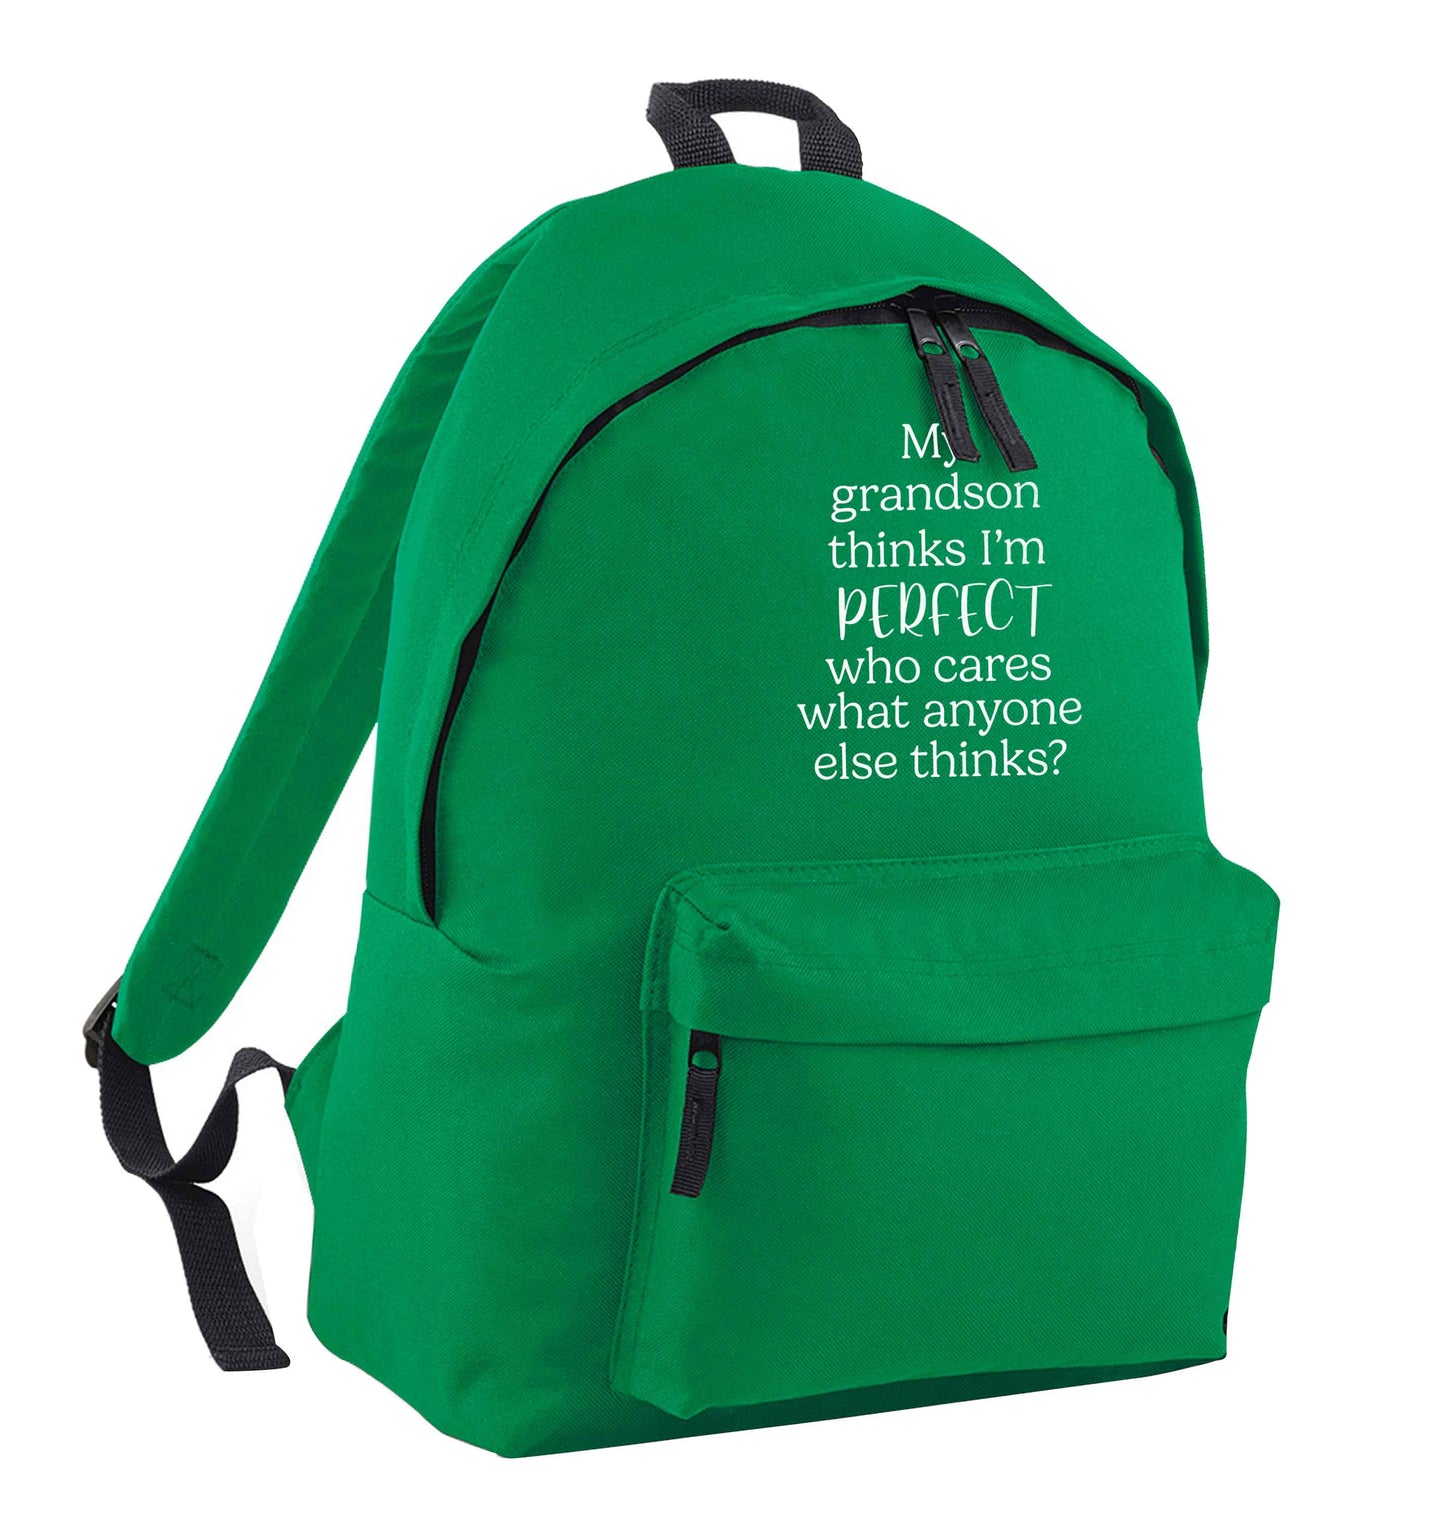 My Grandson thinks I'm perfect who cares what anyone else thinks? green adults backpack